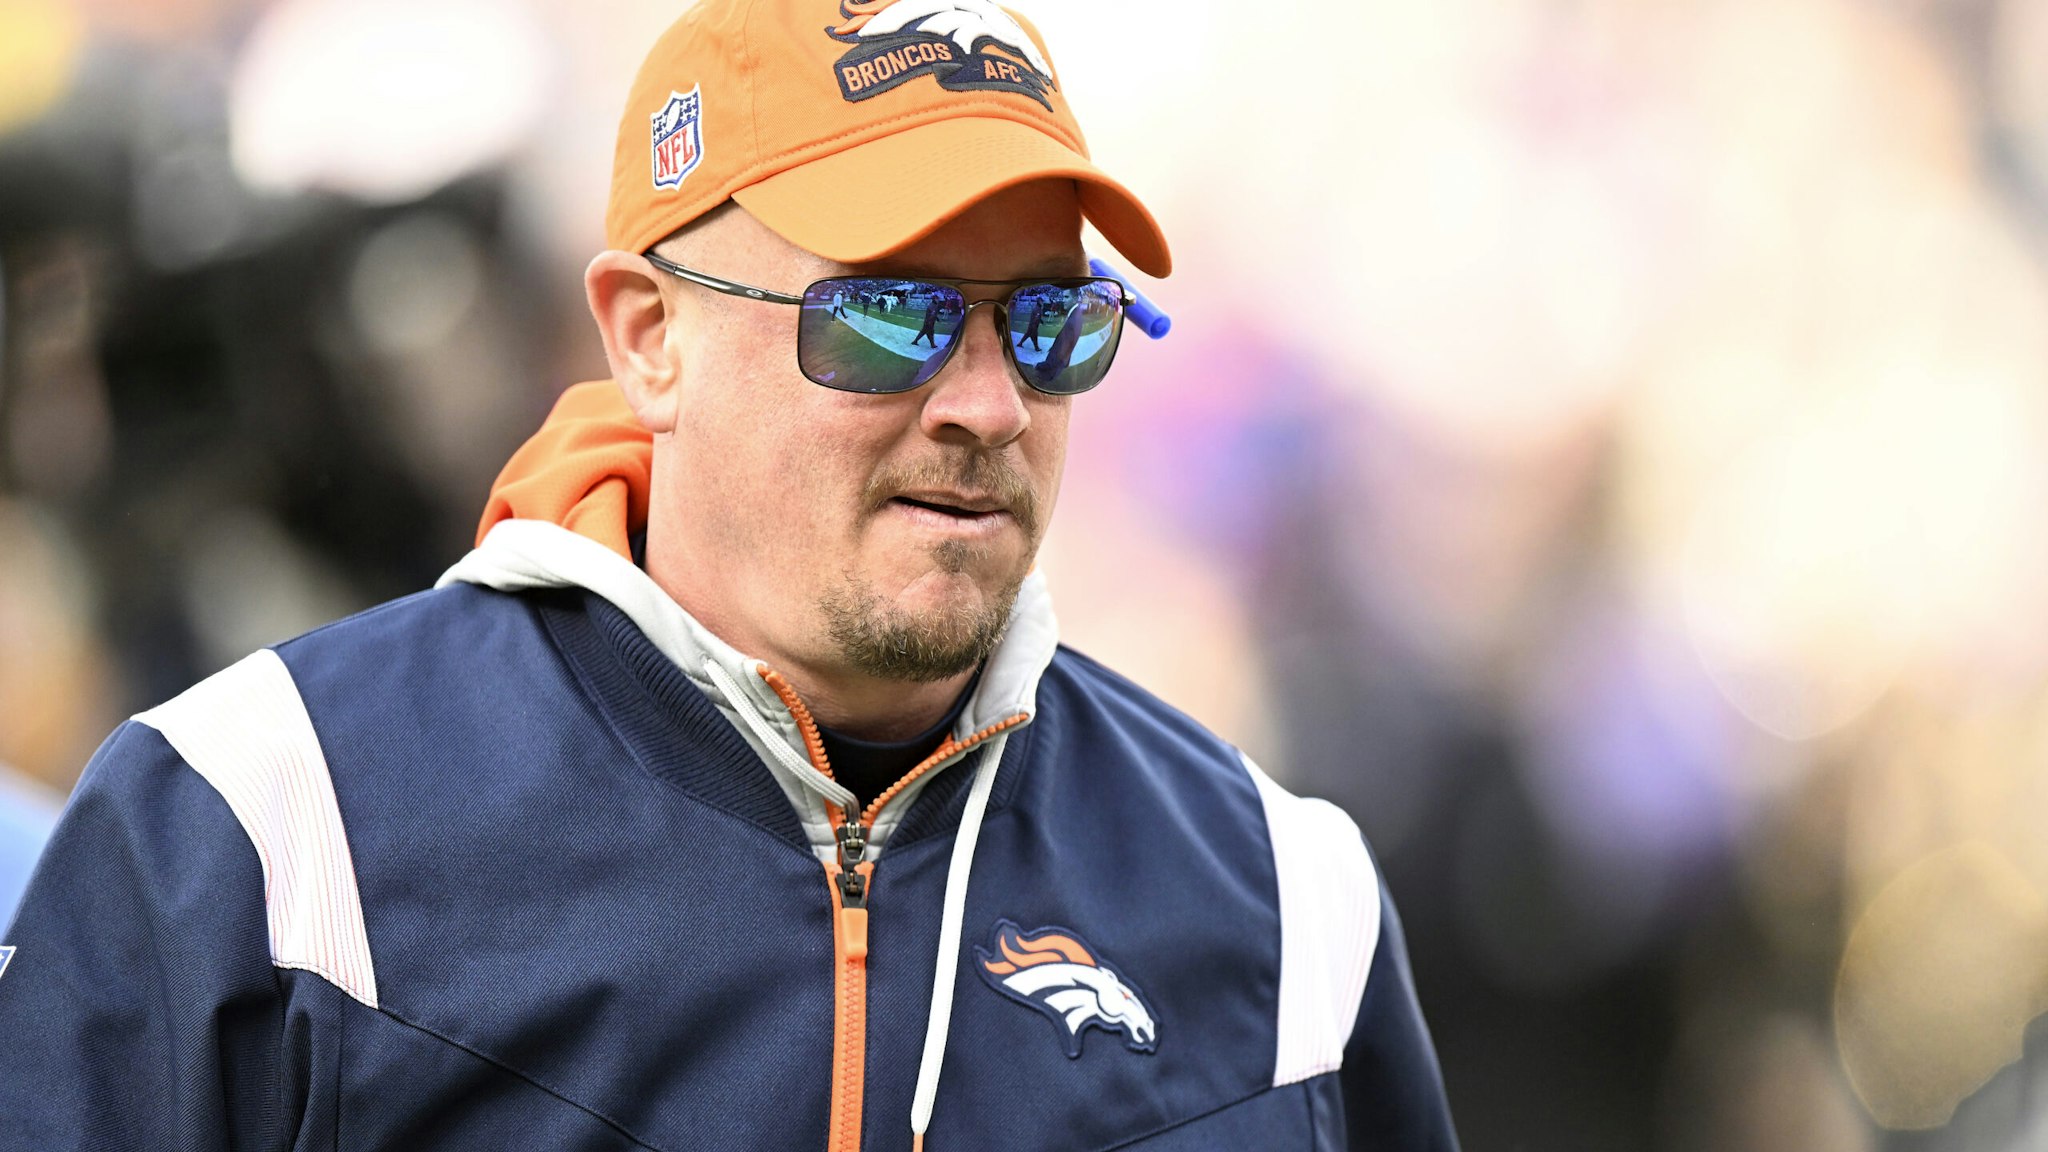 The Denver Broncos fired head coach Nathaniel Hackett Monday, following a humiliating 51-14 loss to the Los Angeles Rams that dropped the team’s record to 4-11.